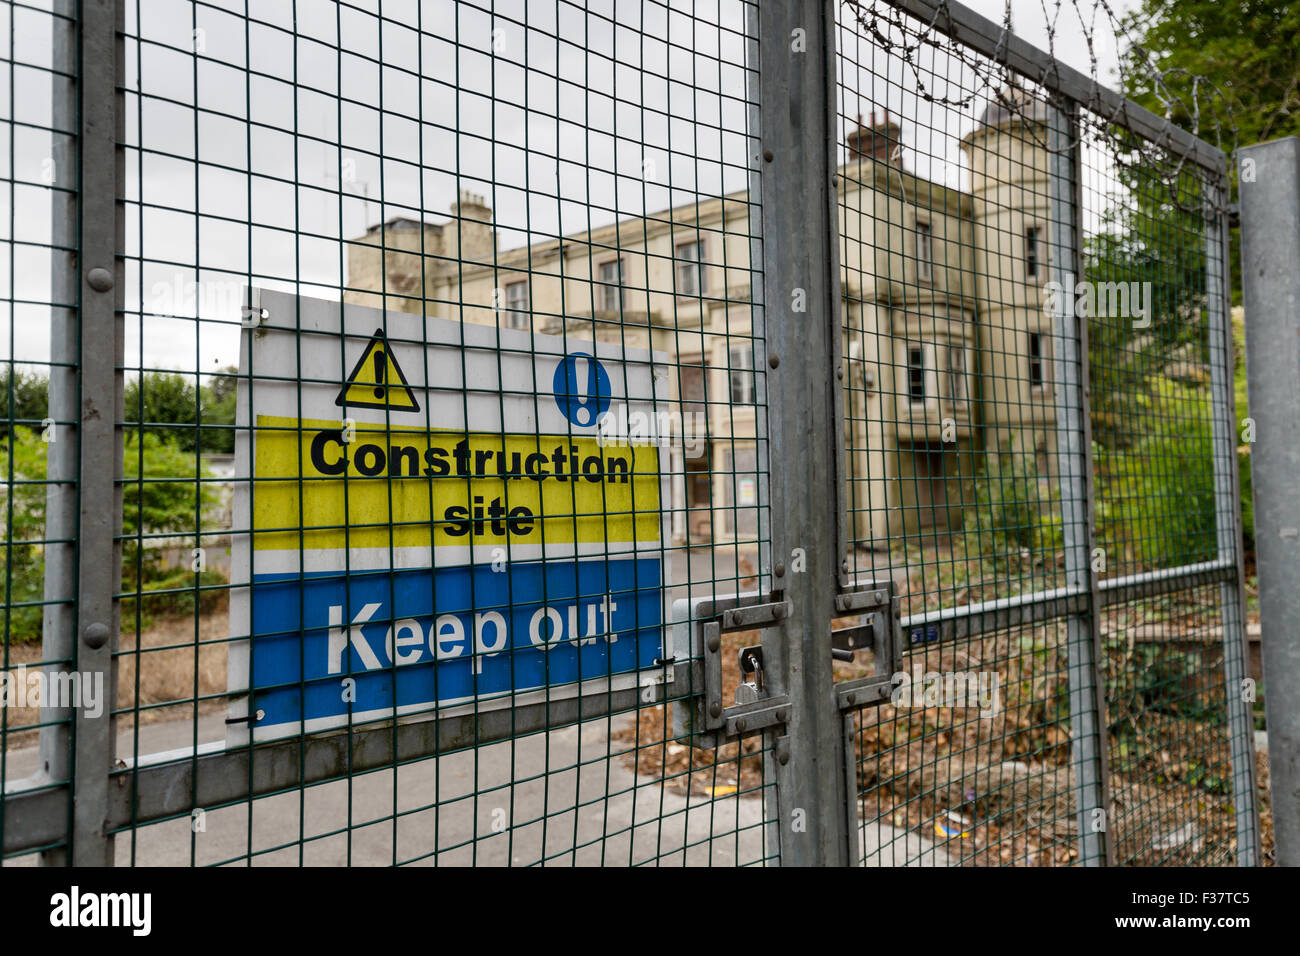 Construction site 'keep out' sign. England UK Stock Photo